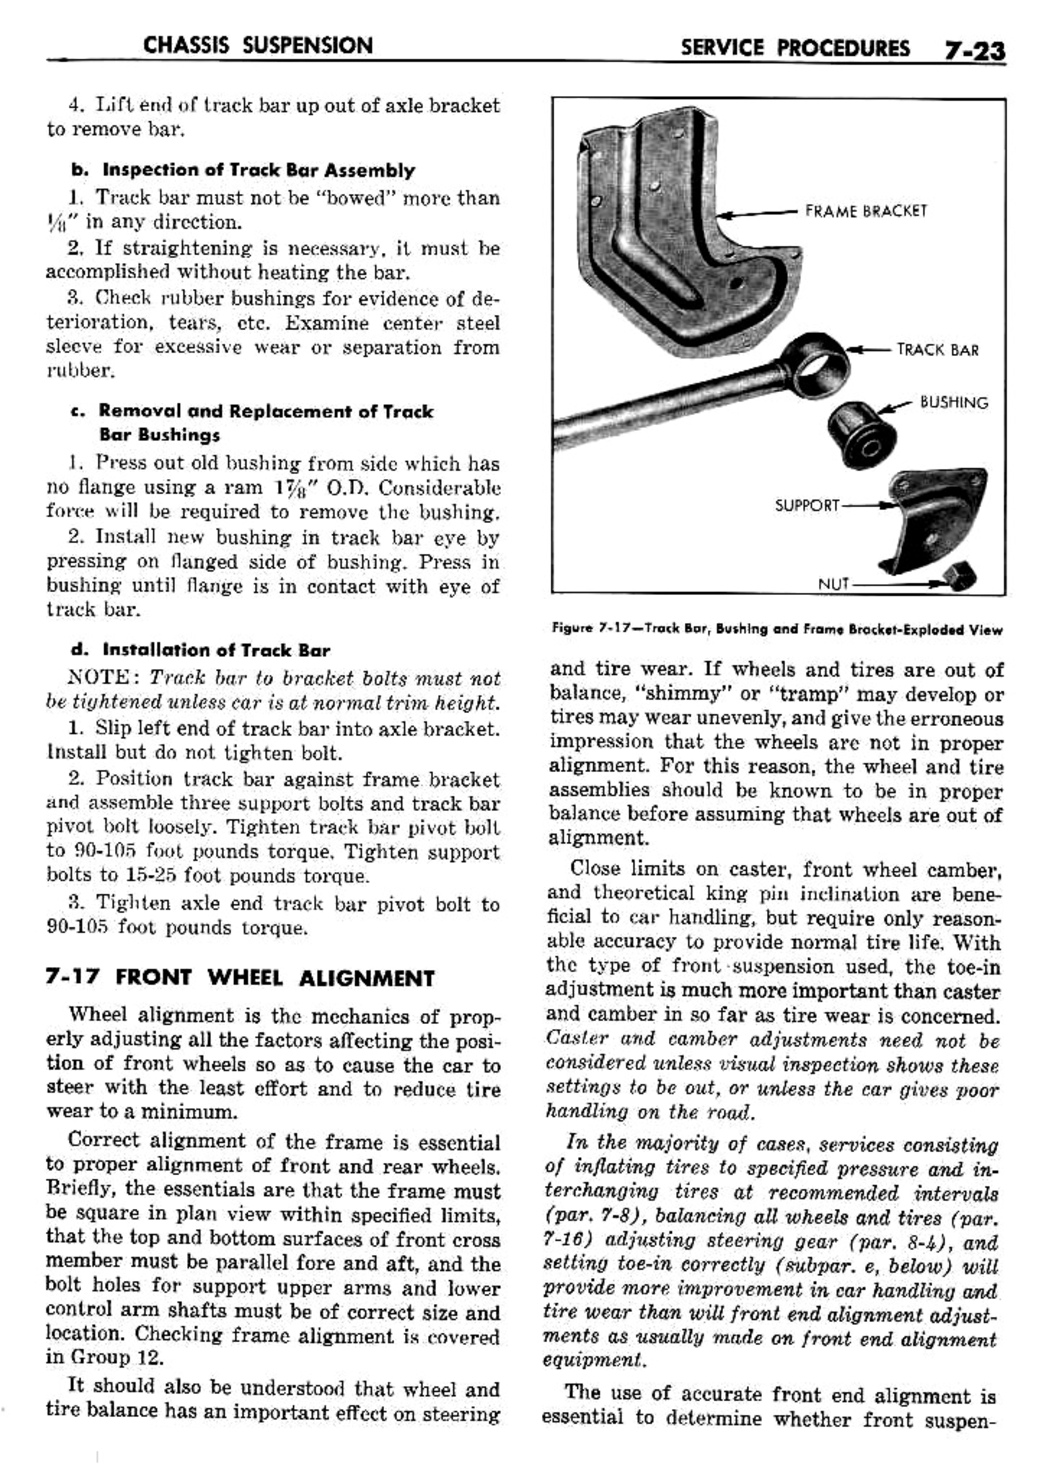 n_08 1960 Buick Shop Manual - Chassis Suspension-023-023.jpg